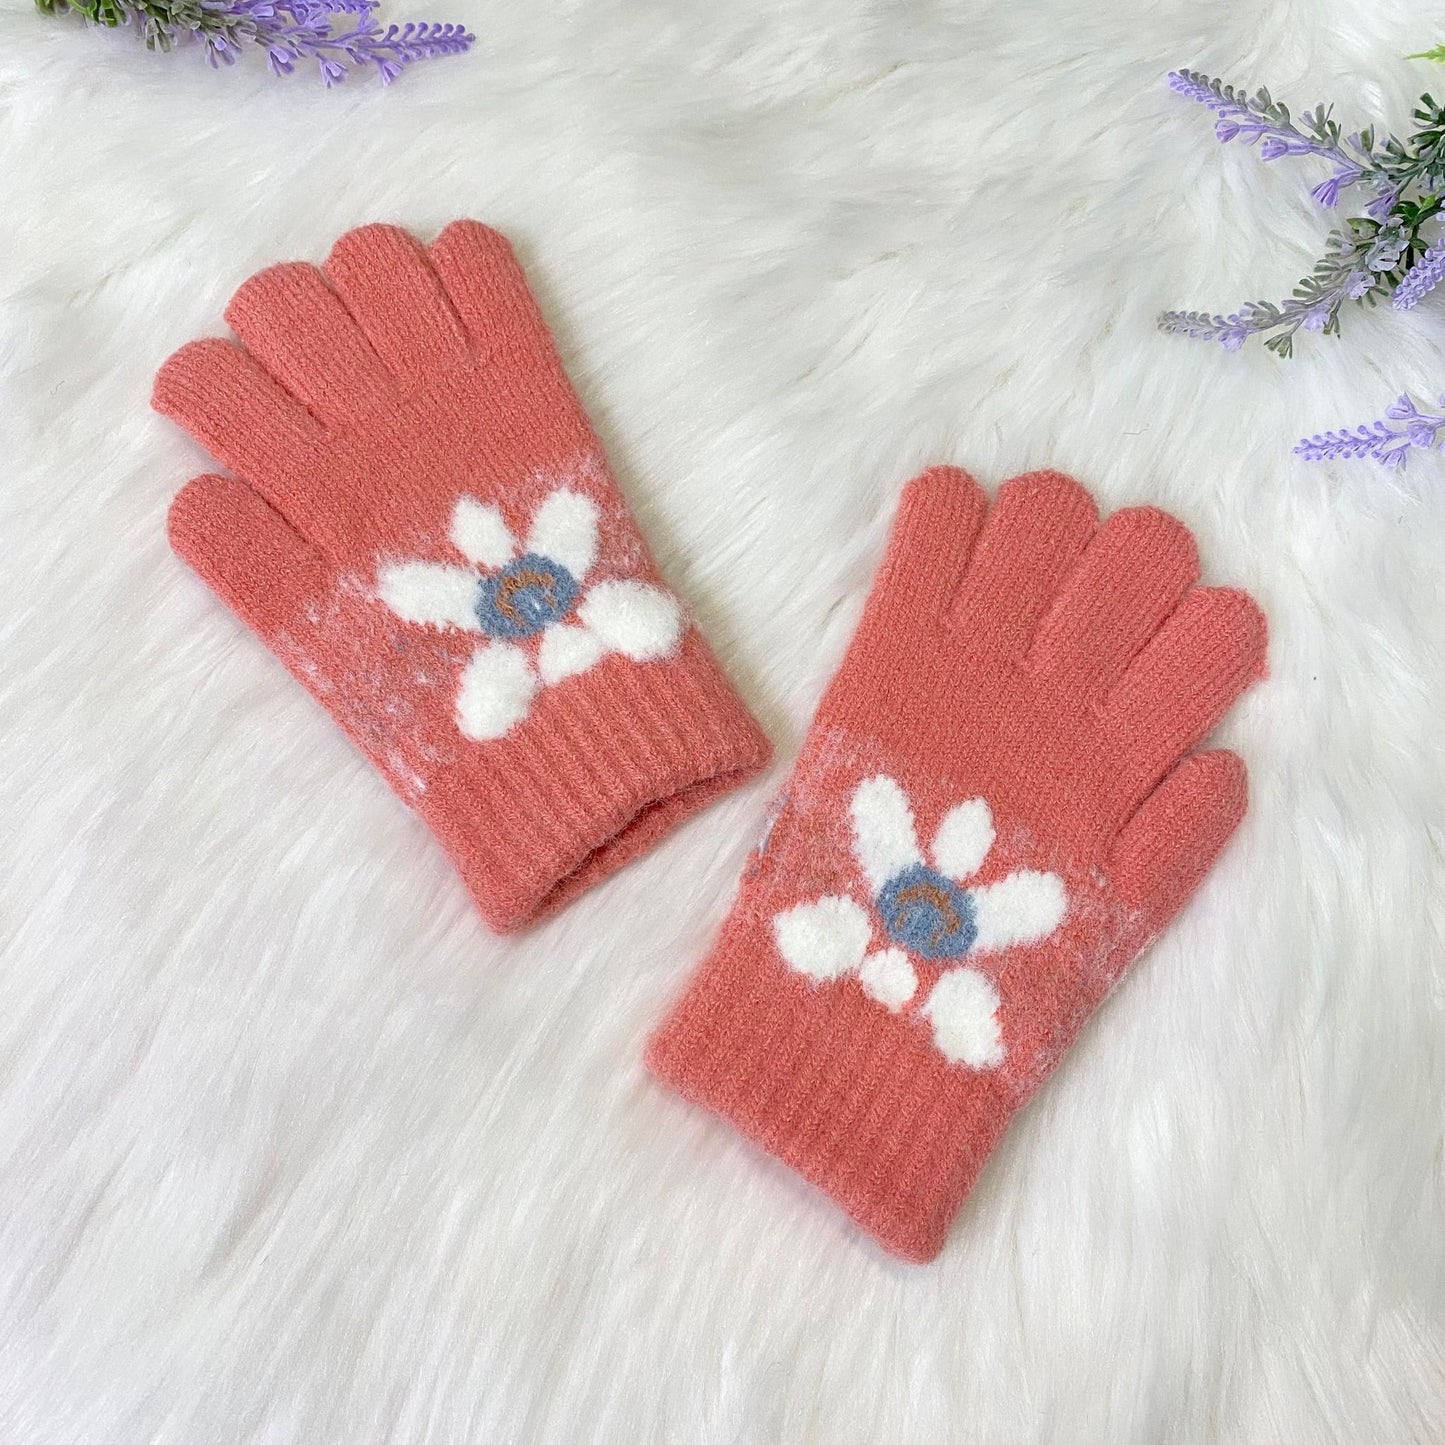 Fleece Lined Kids Handknit Gloves, Mittens for 4 to 8 years Old